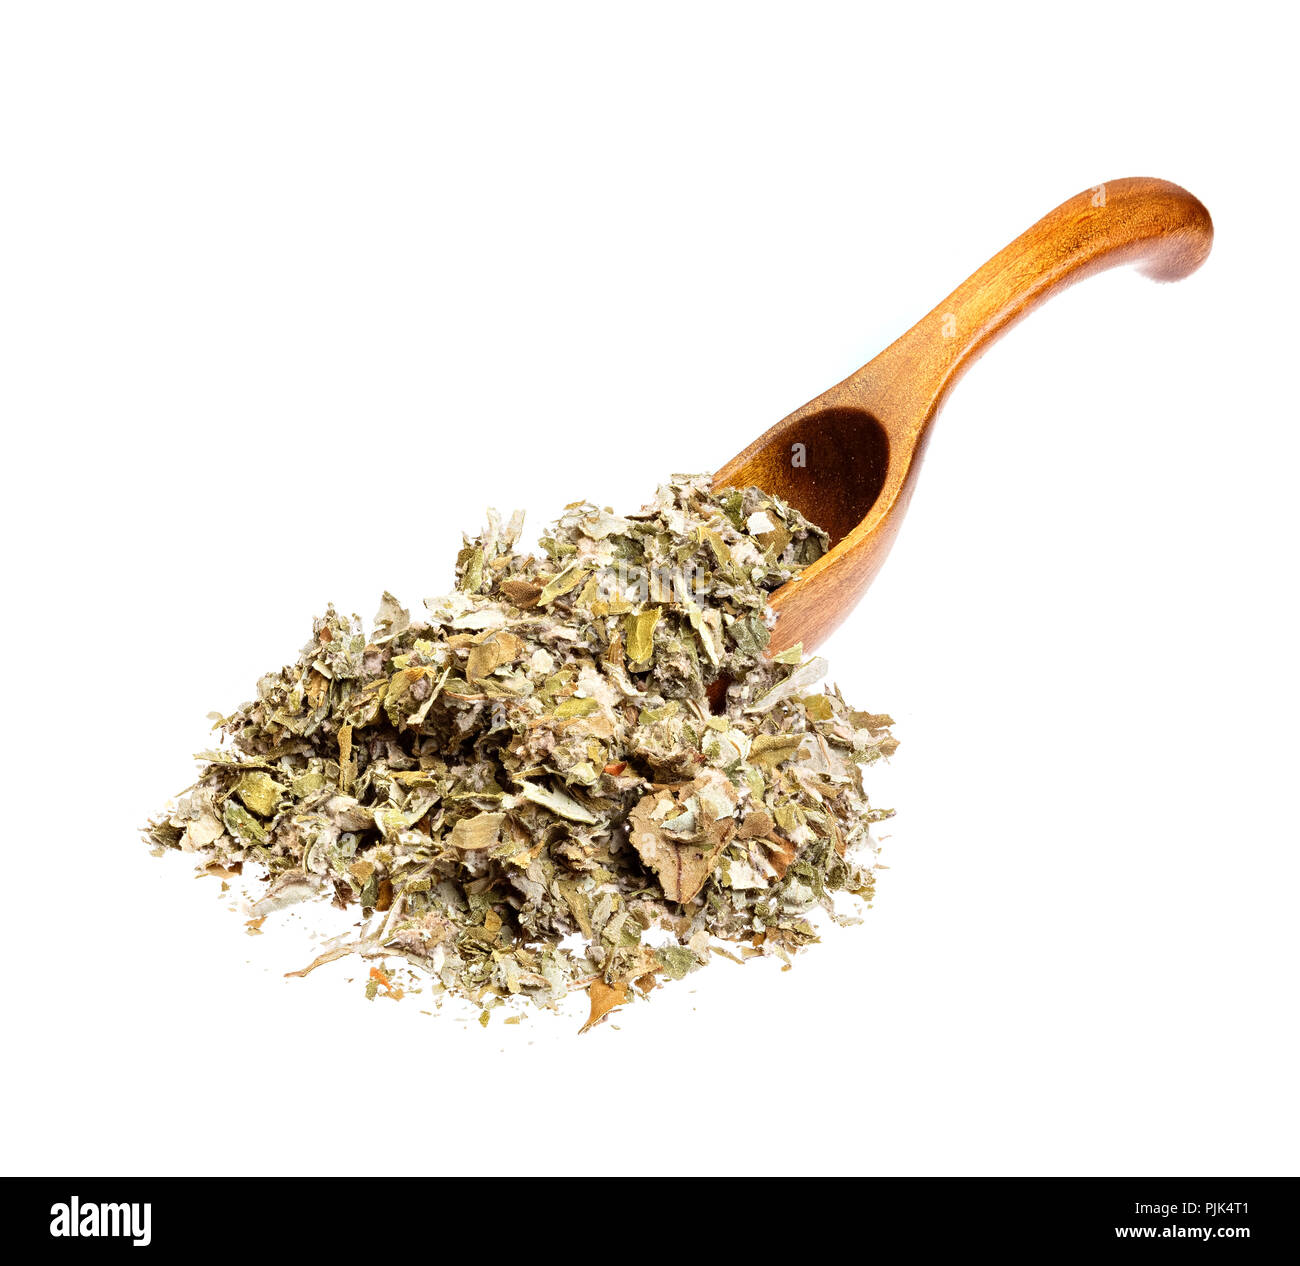 Dried foliage of coltsfoot on the wooden spoon Tussilago farfara for medical use. High resolution photo. Stock Photo